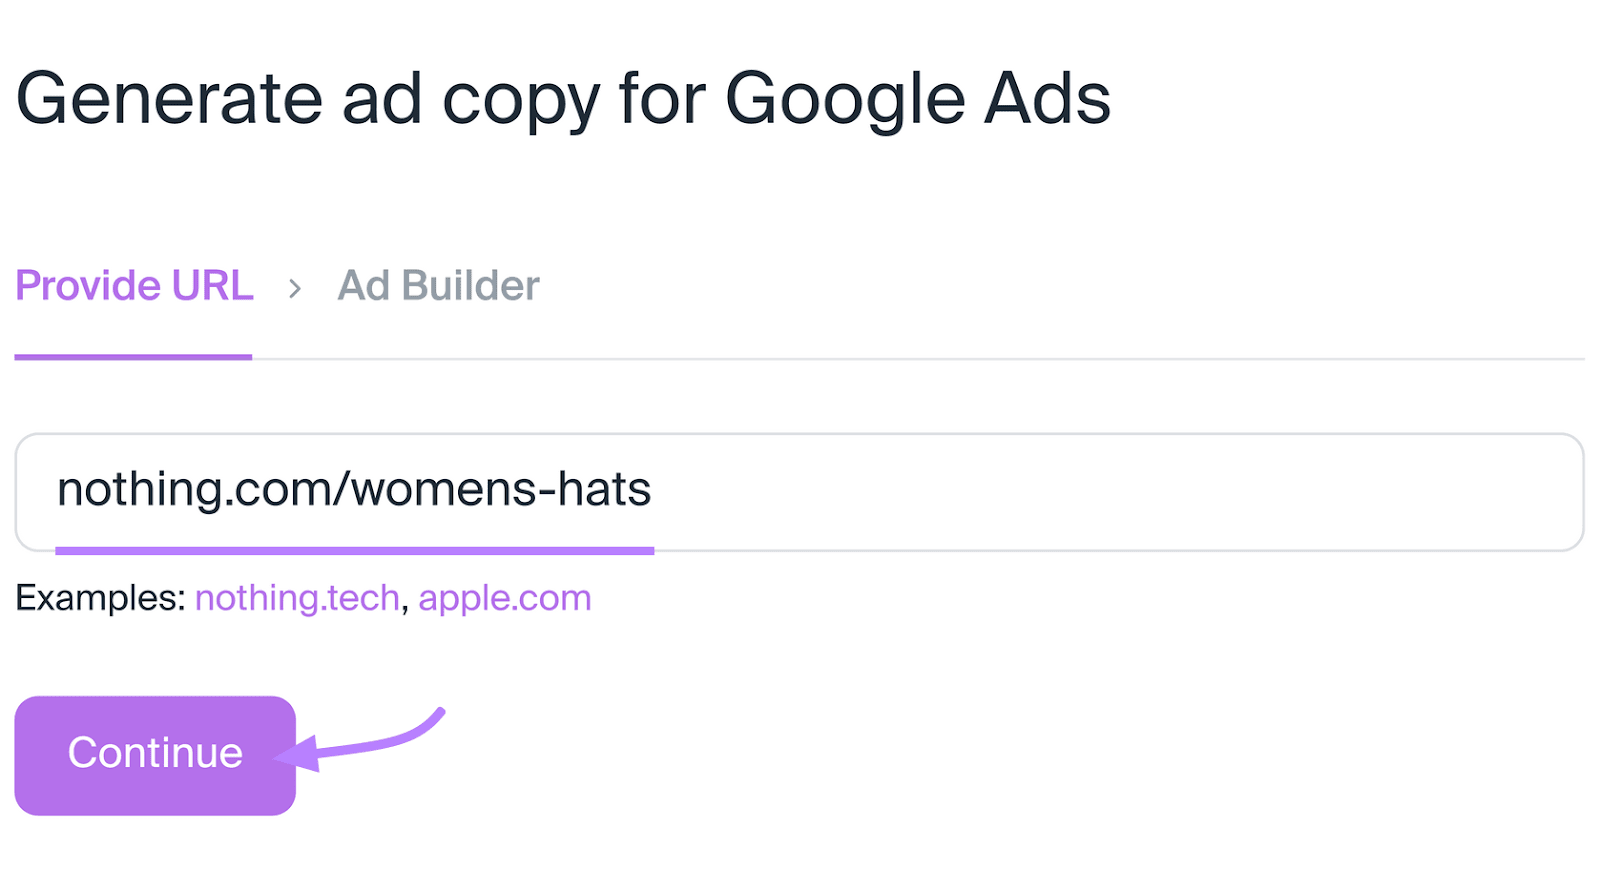 "nothing.com/womens-hats" entered into the AI Ad Copy Generator search bar